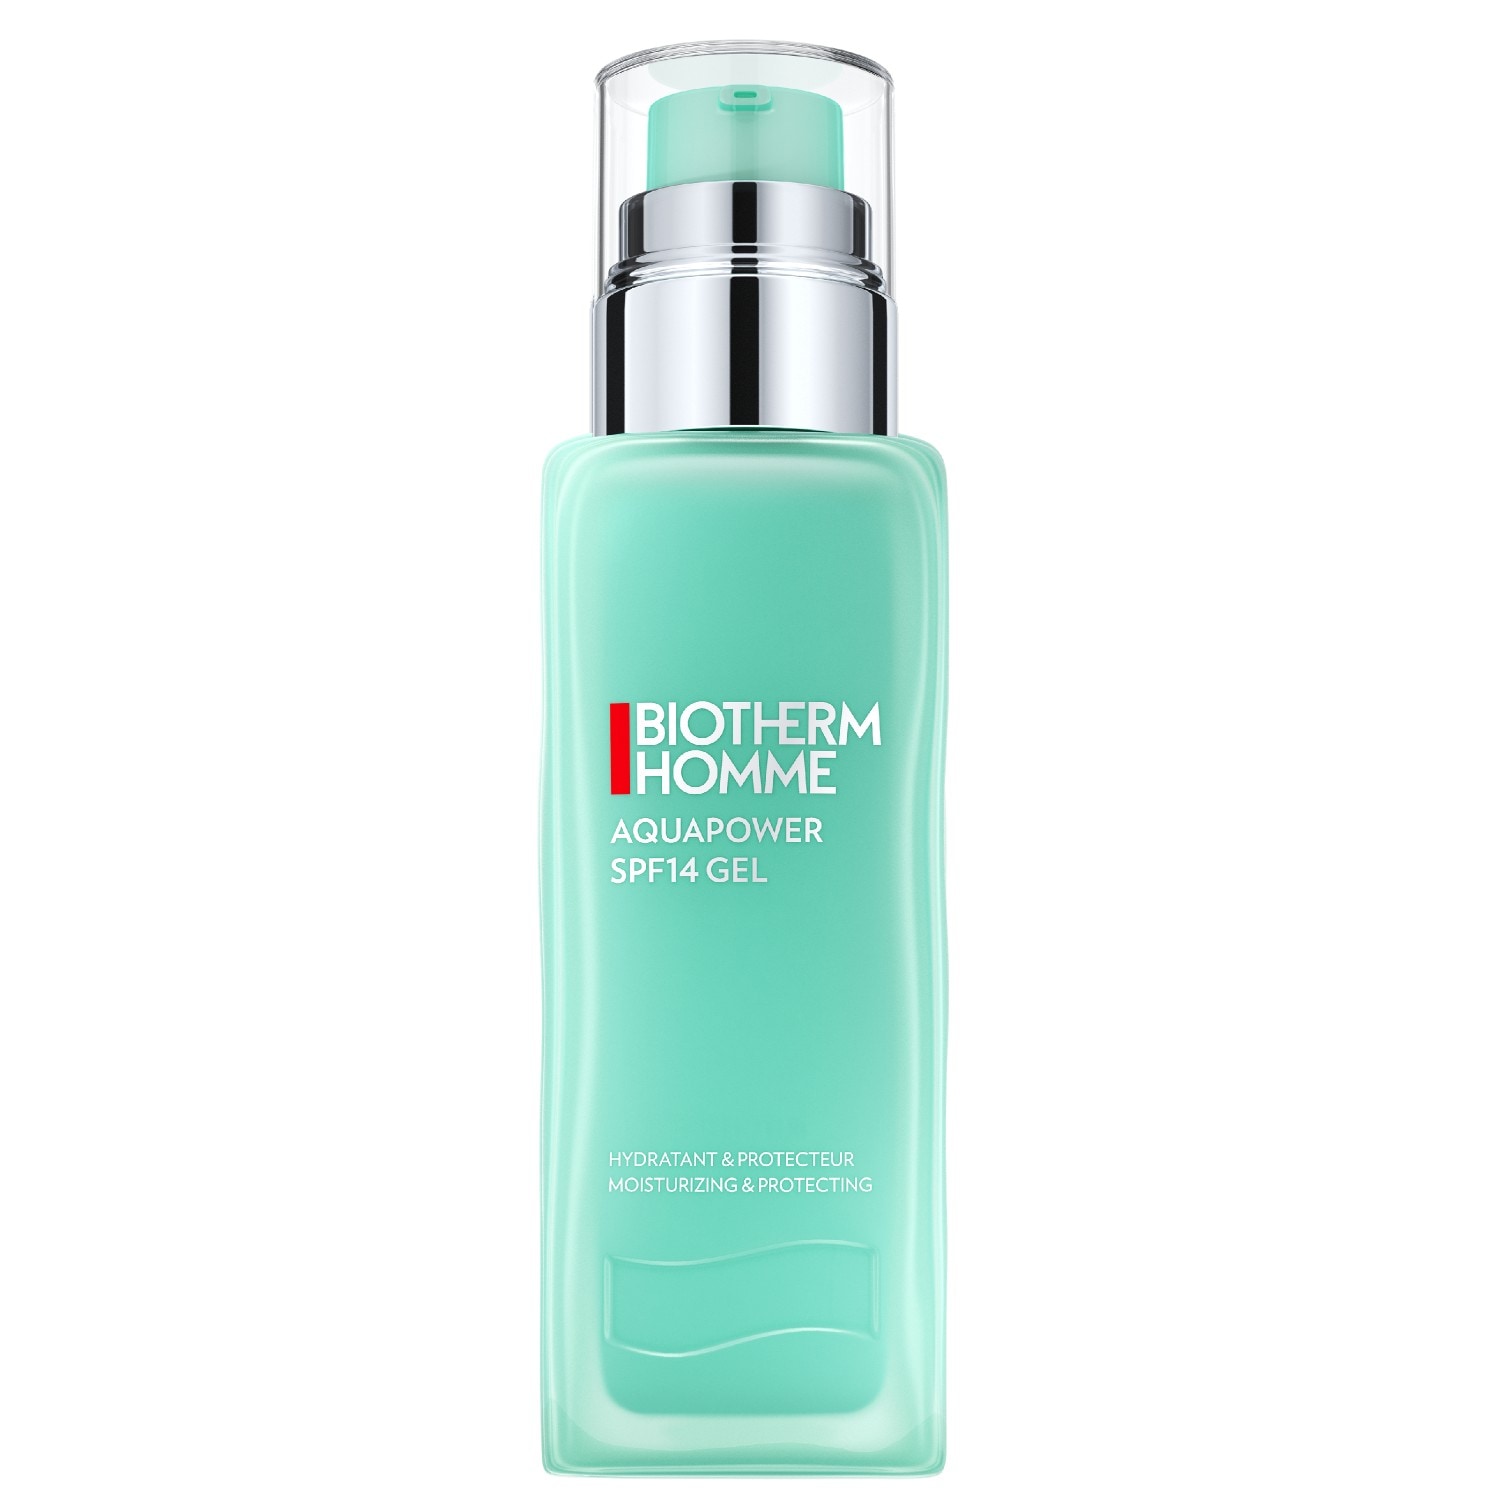 Biotherm Homme SPF14 Facial Gel